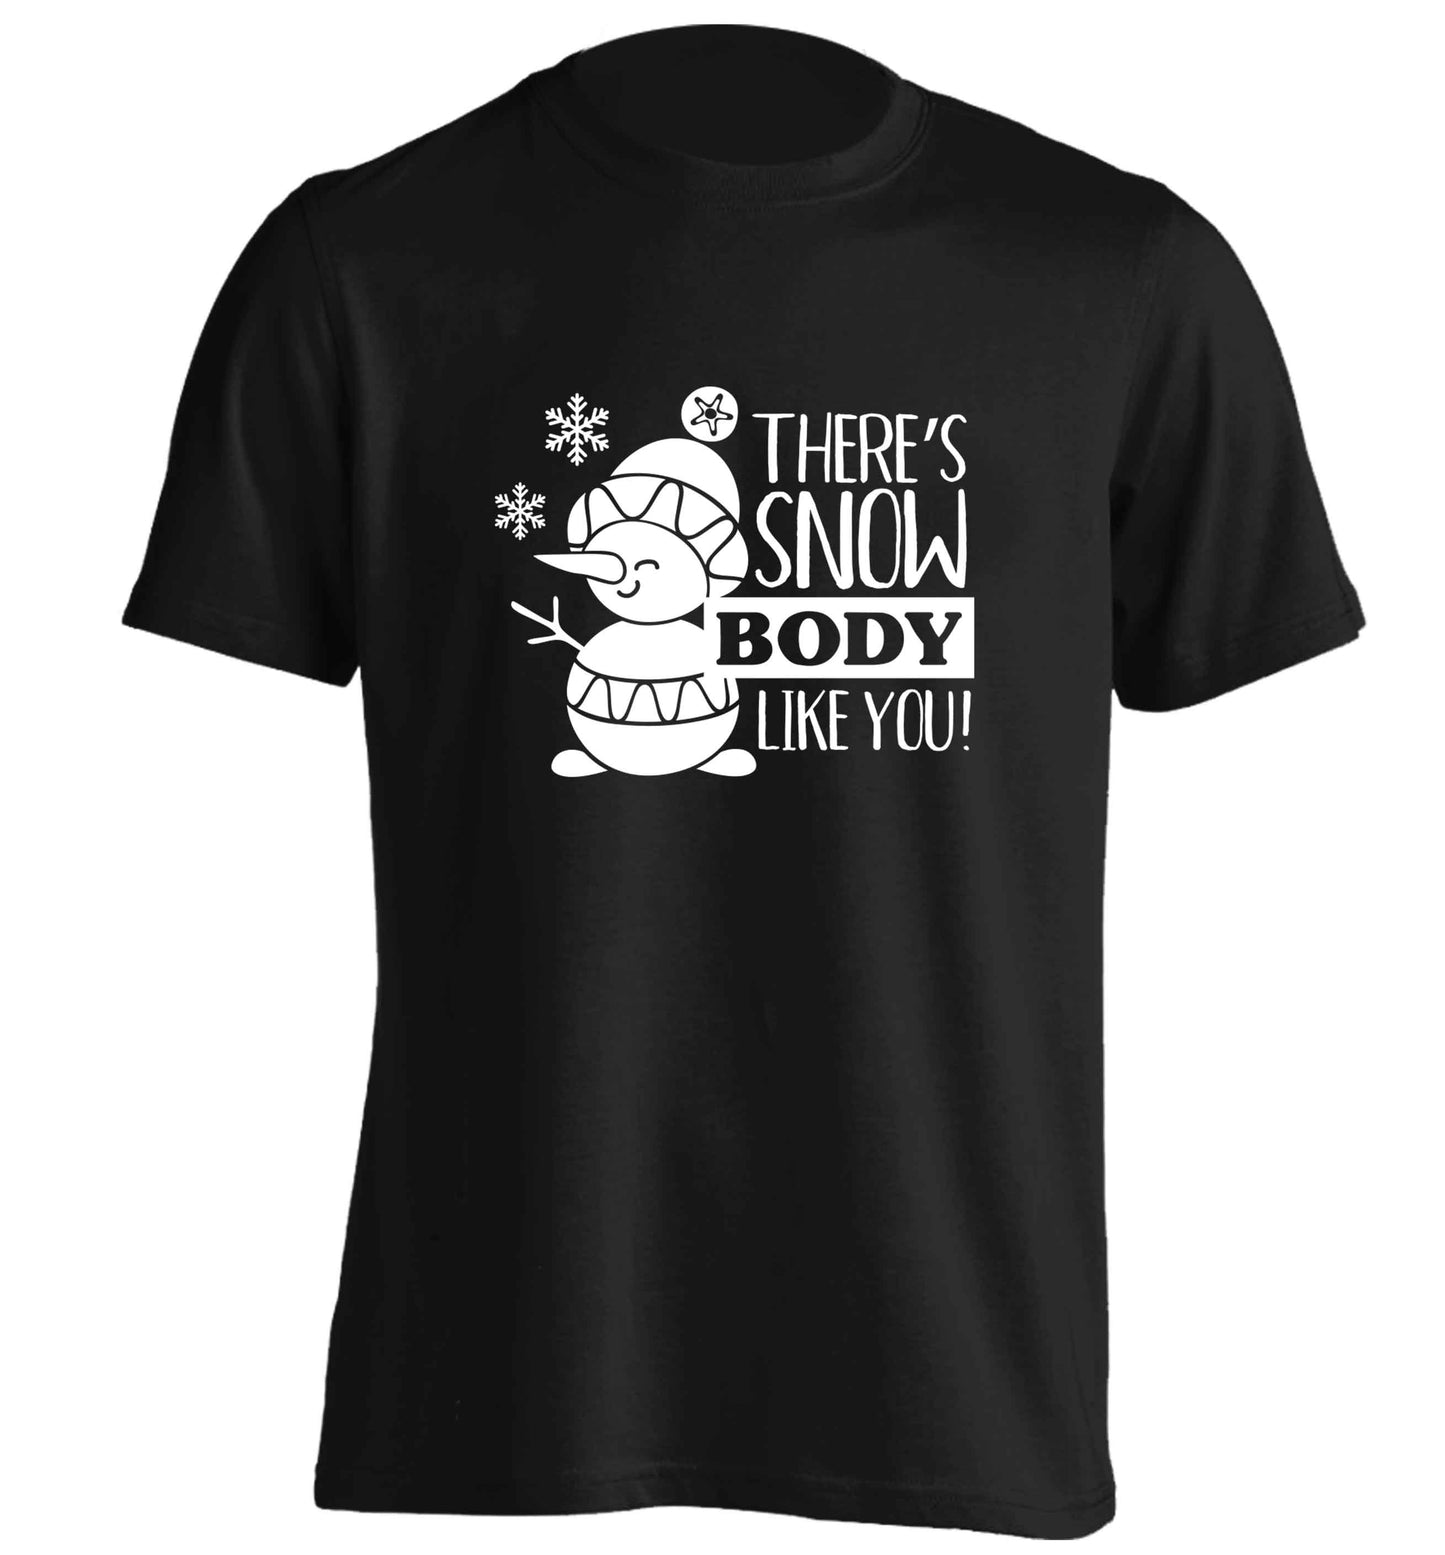 There's snow body like you adults unisex black Tshirt 2XL